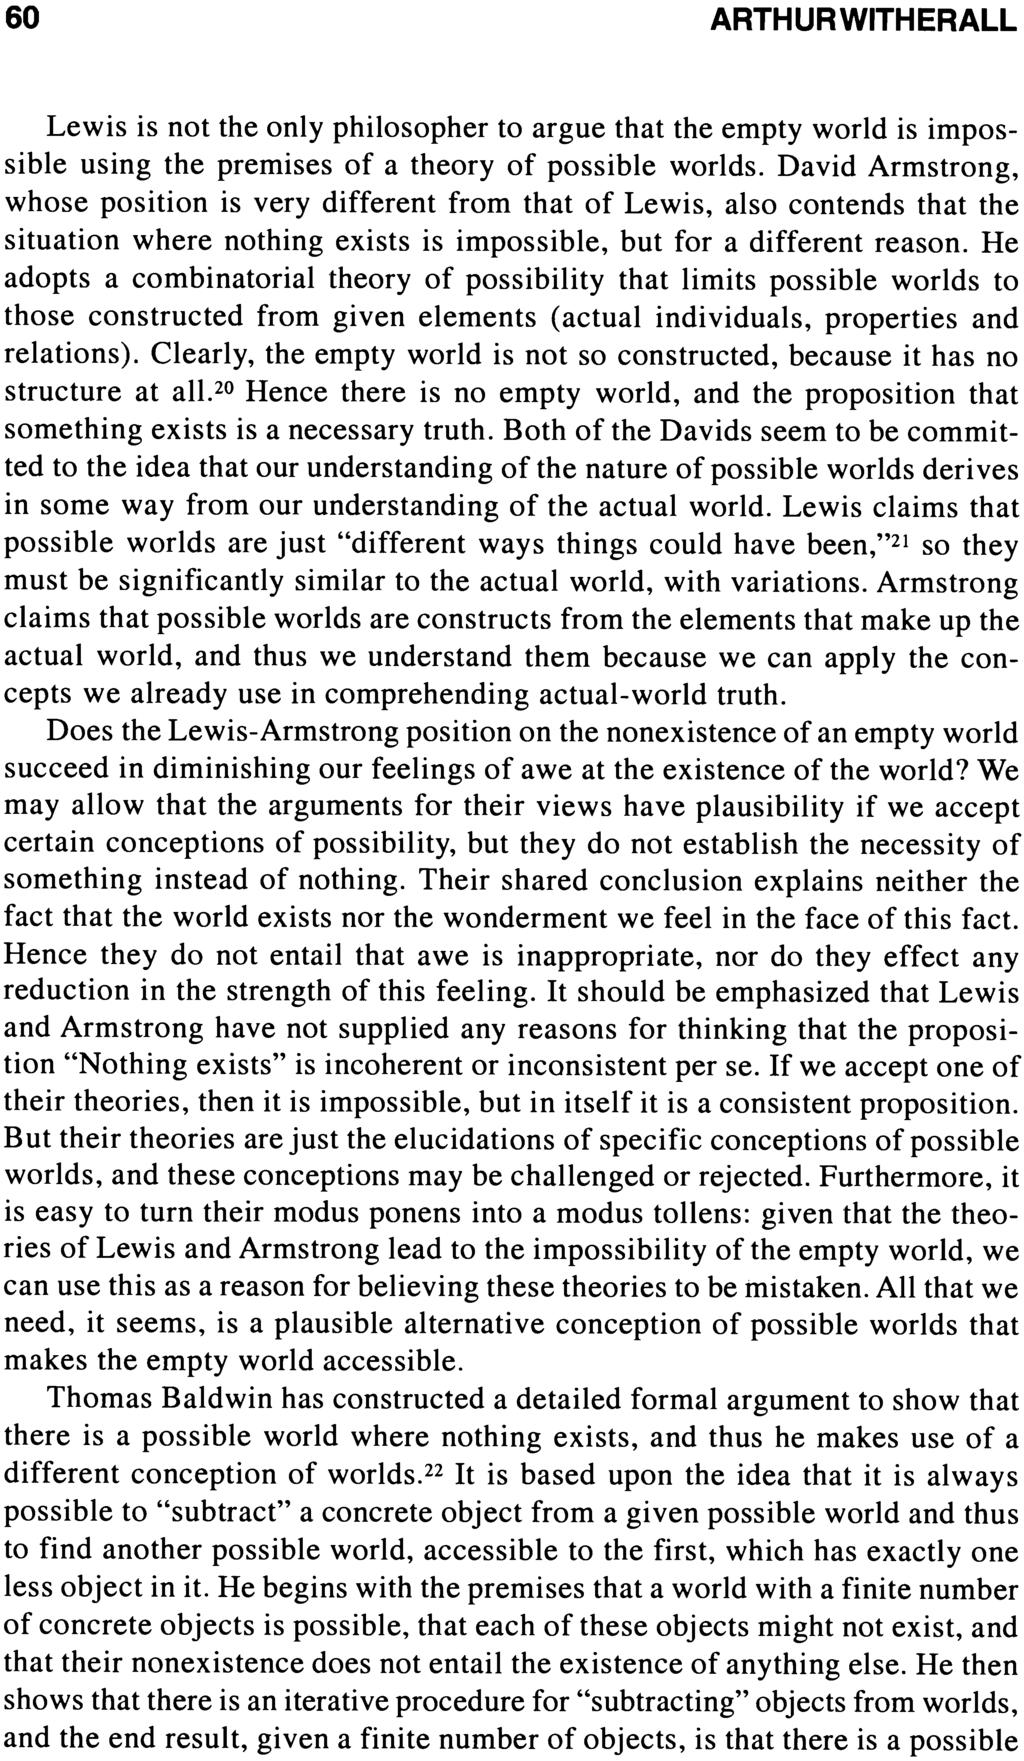 60 ARTHURWITHERALL Lewis is not the only philosopher to argue that the empty world is impossible using the premises of a theory of possible worlds.